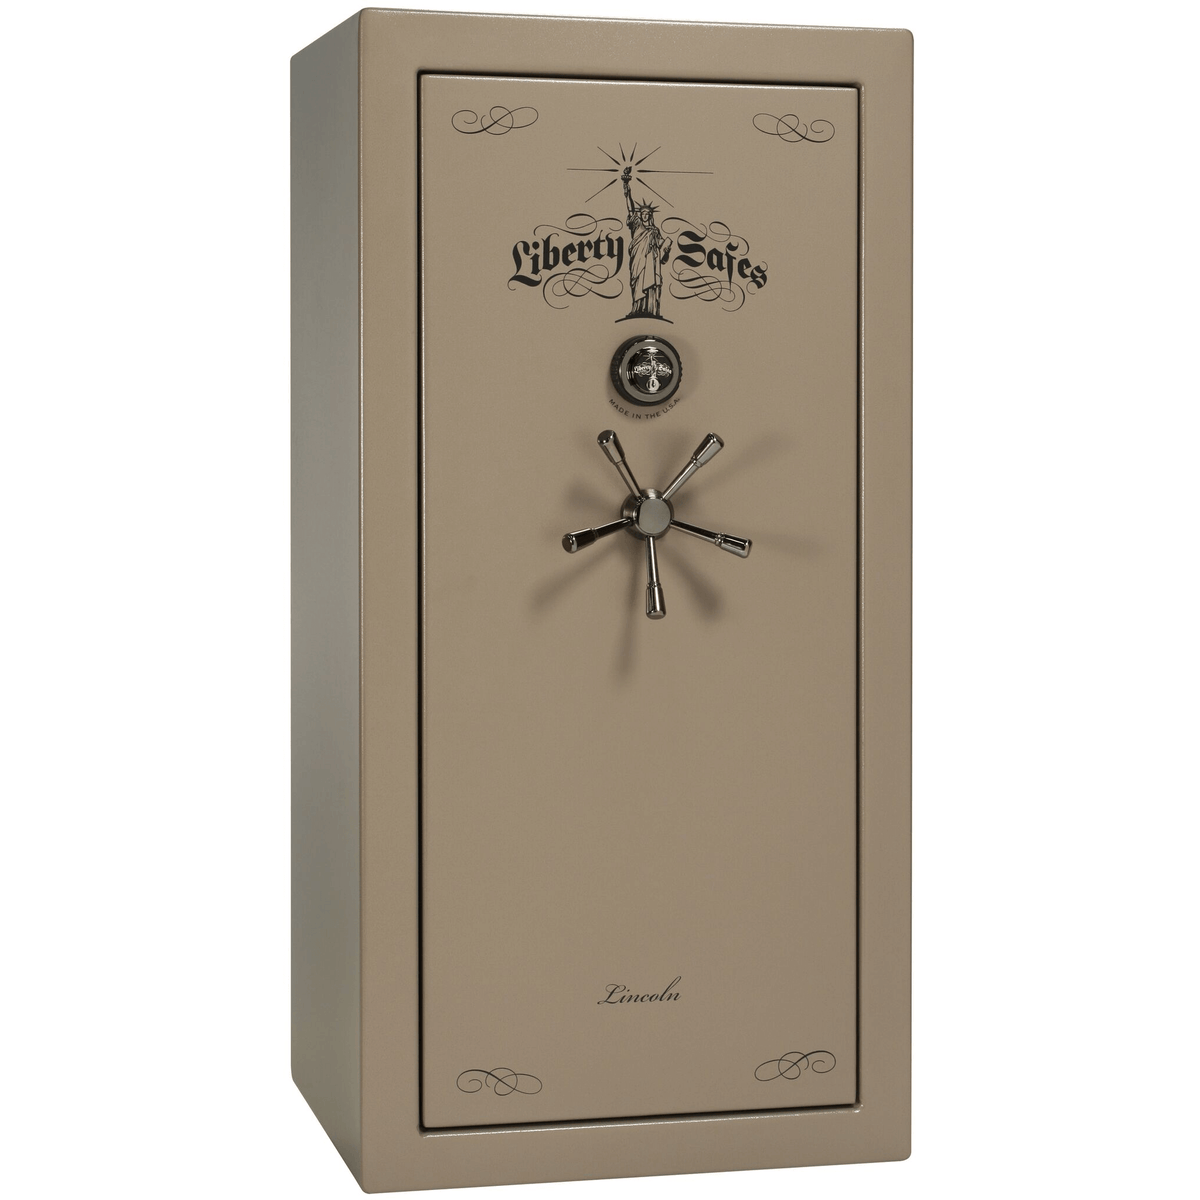 Liberty Lincoln 25 Safe in Champagne Marble with Black Chrome Mechanical Lock.